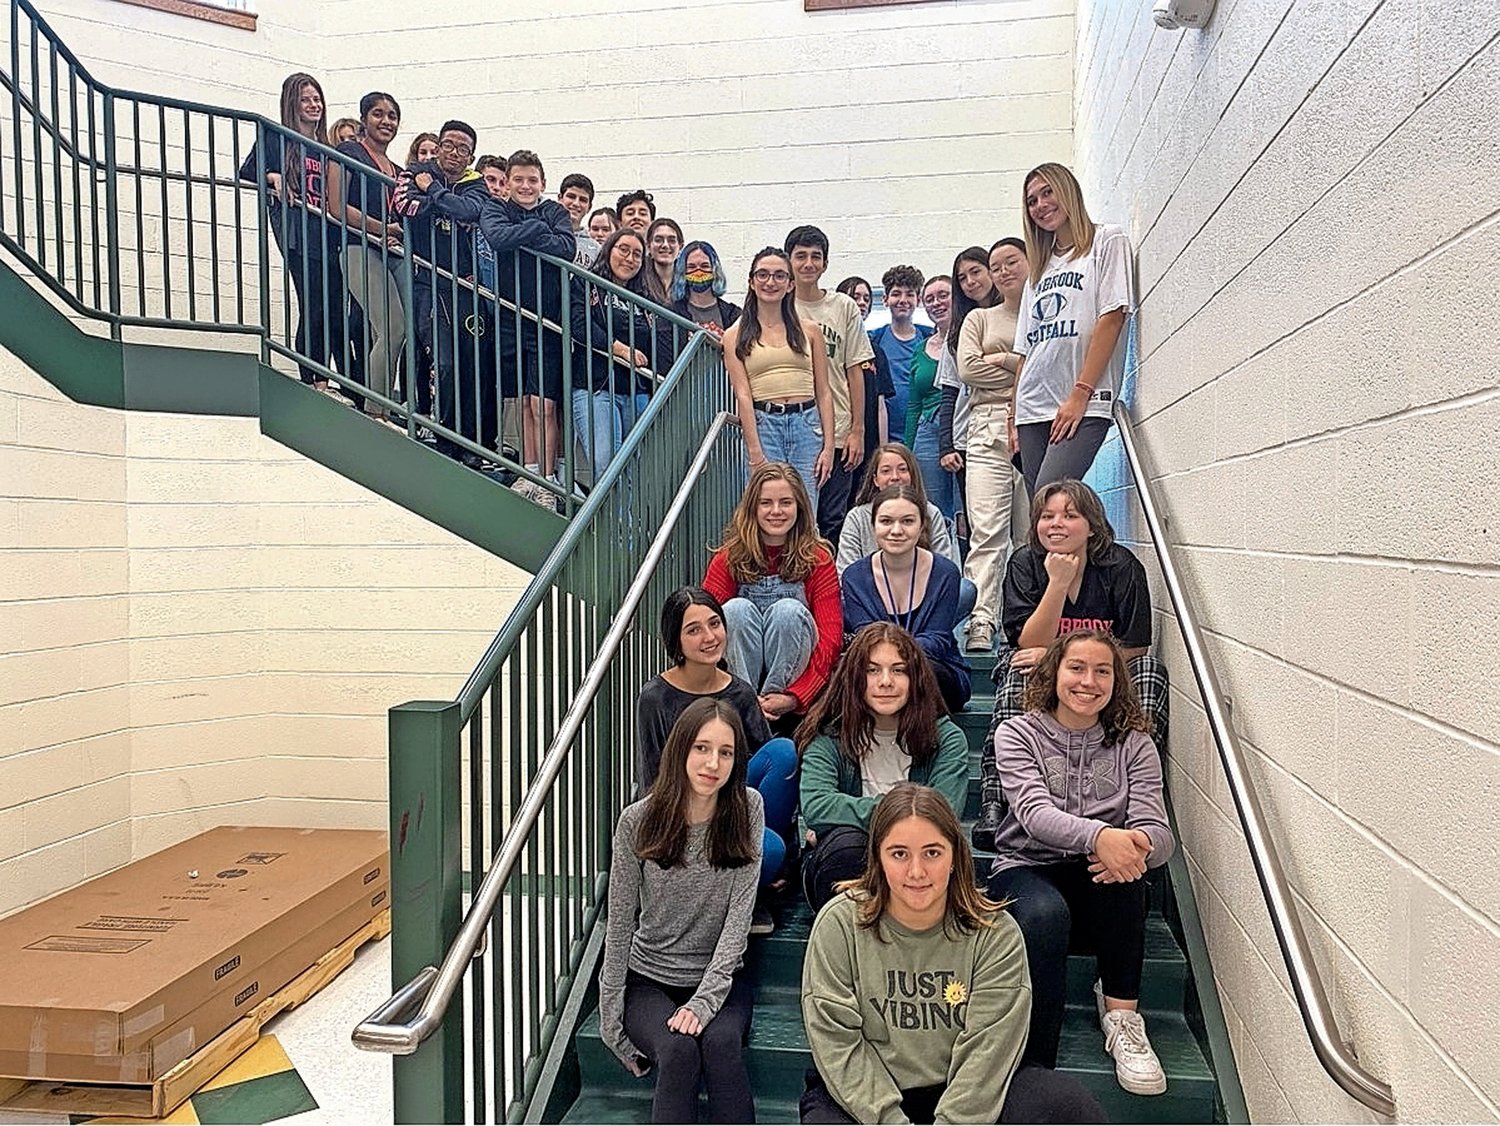 The Lynbrook High School Horizon newspaper staff won several awards from the Empire State Scholastic Press Association, including Best Overall Newspaper.